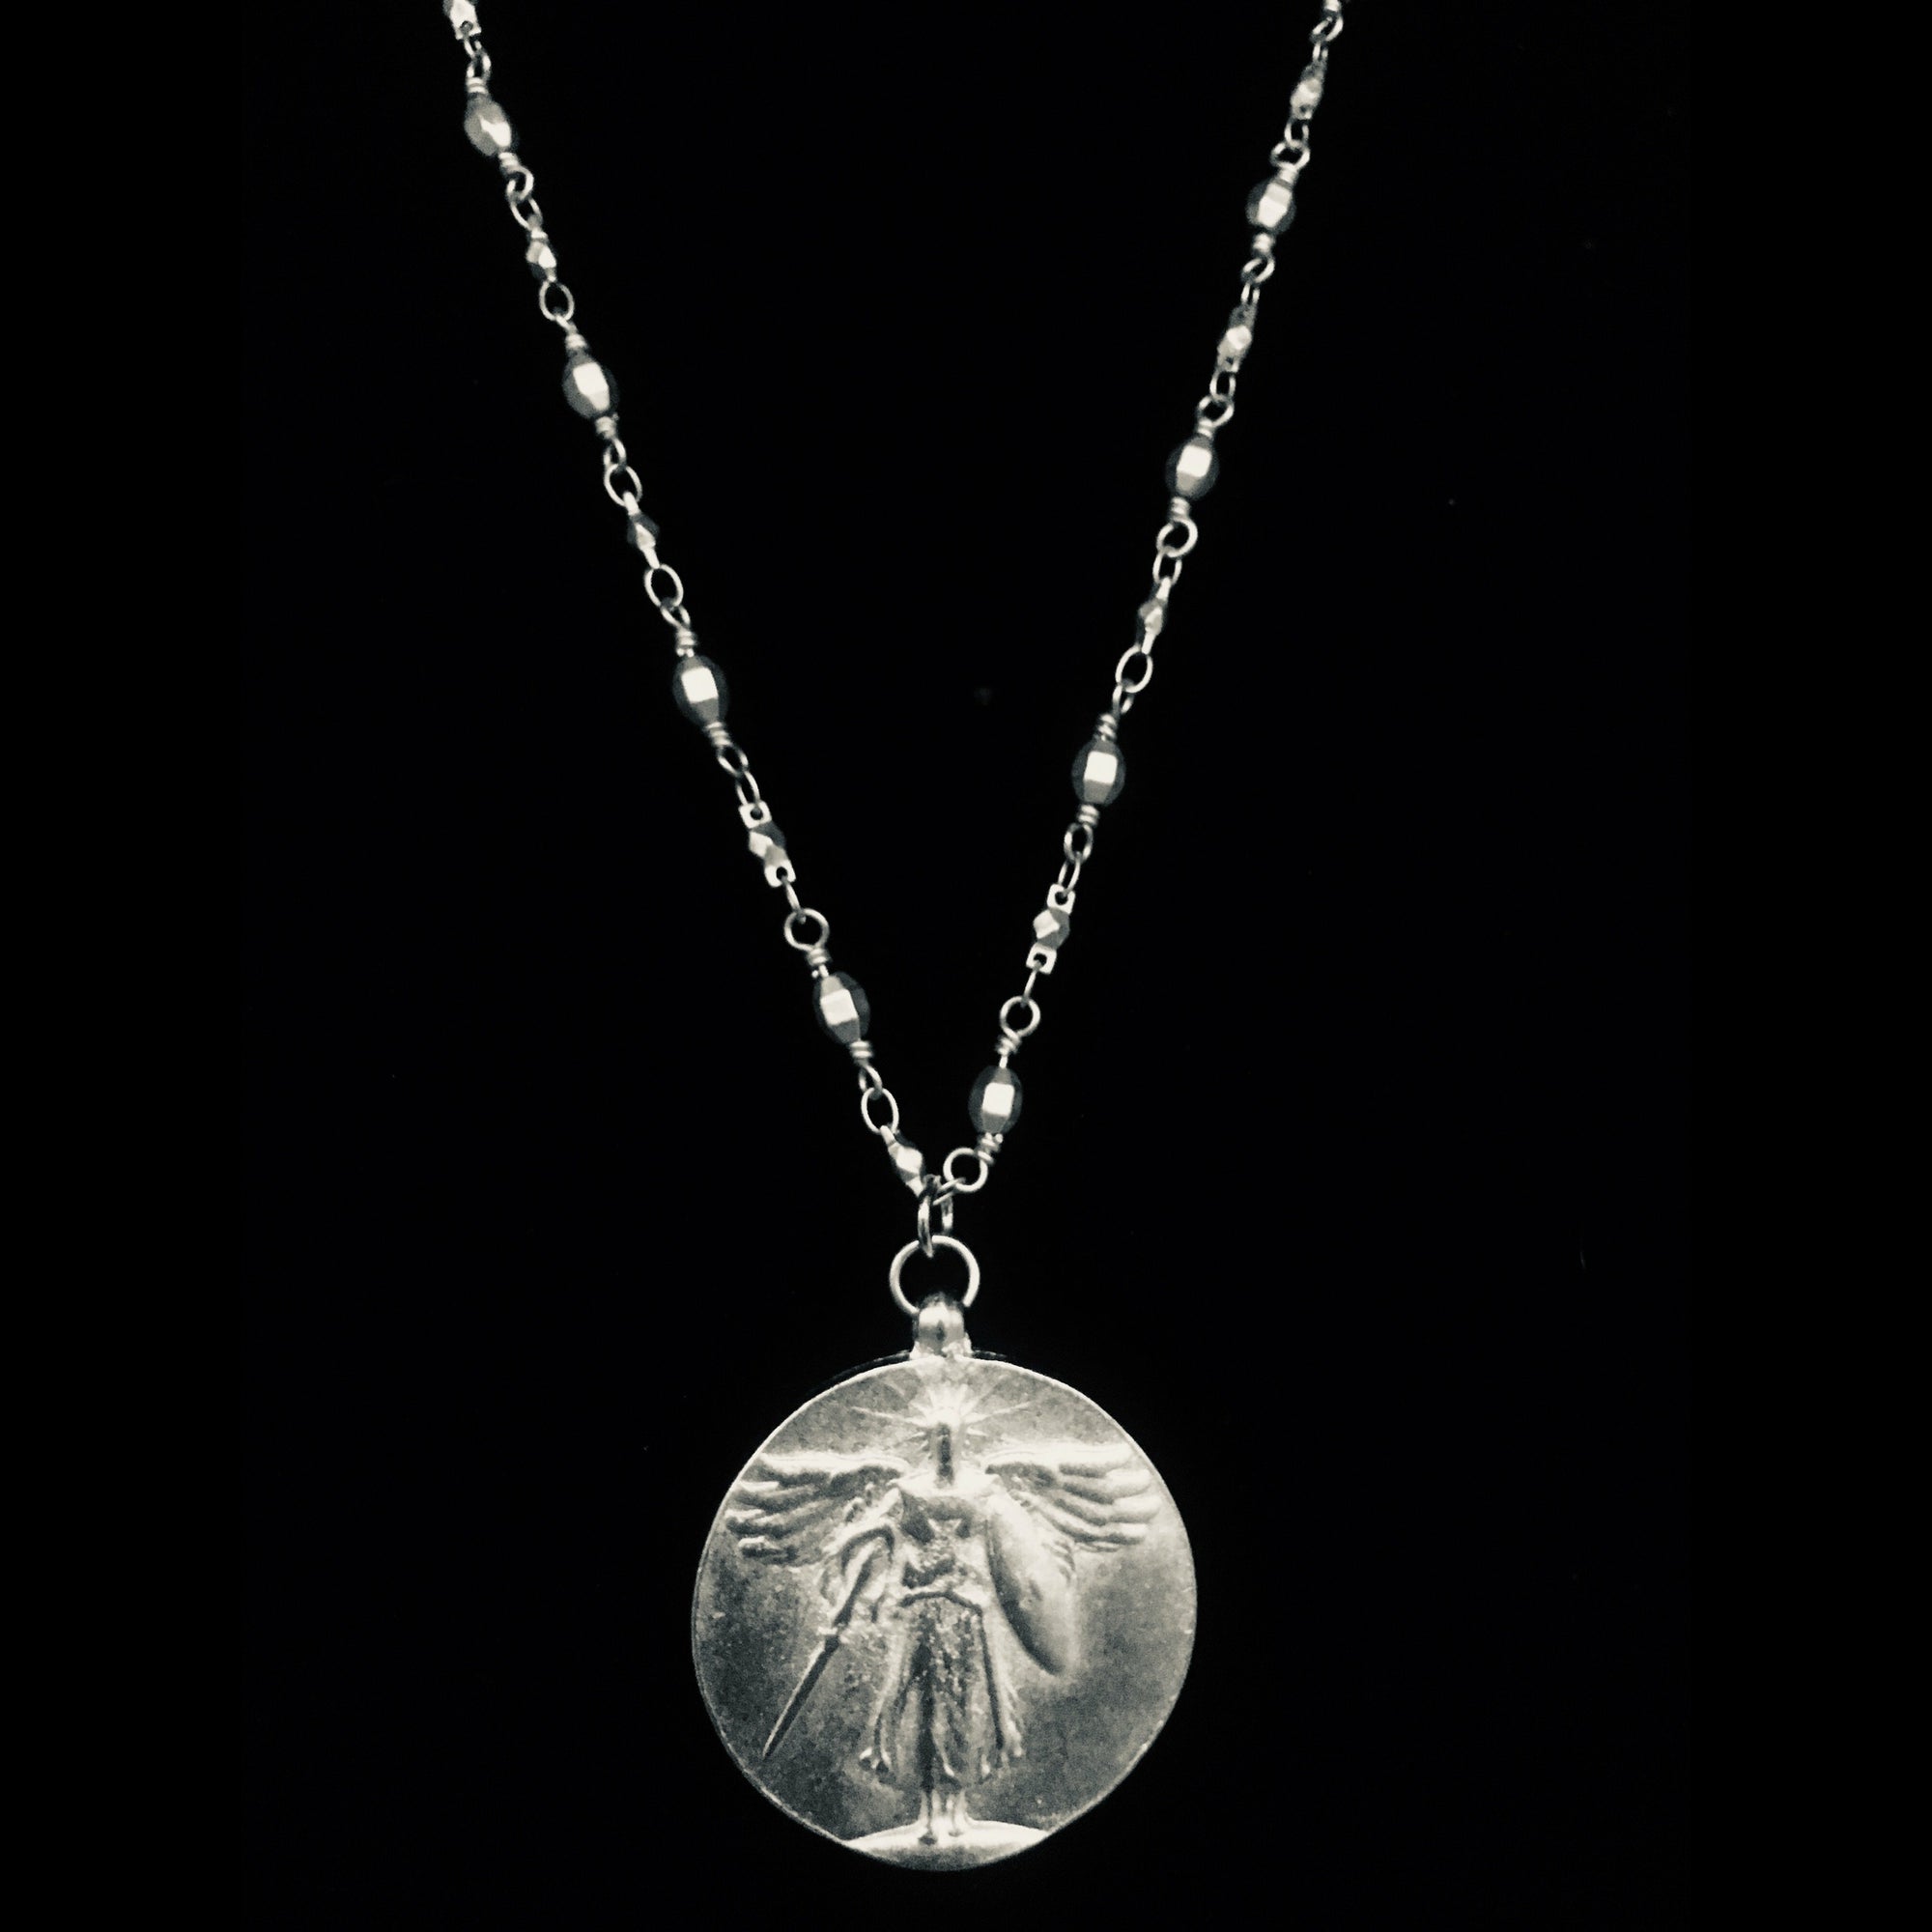 St. Michael Victory Medallion Chain Necklace by Whispering Goddess - Gunmetal